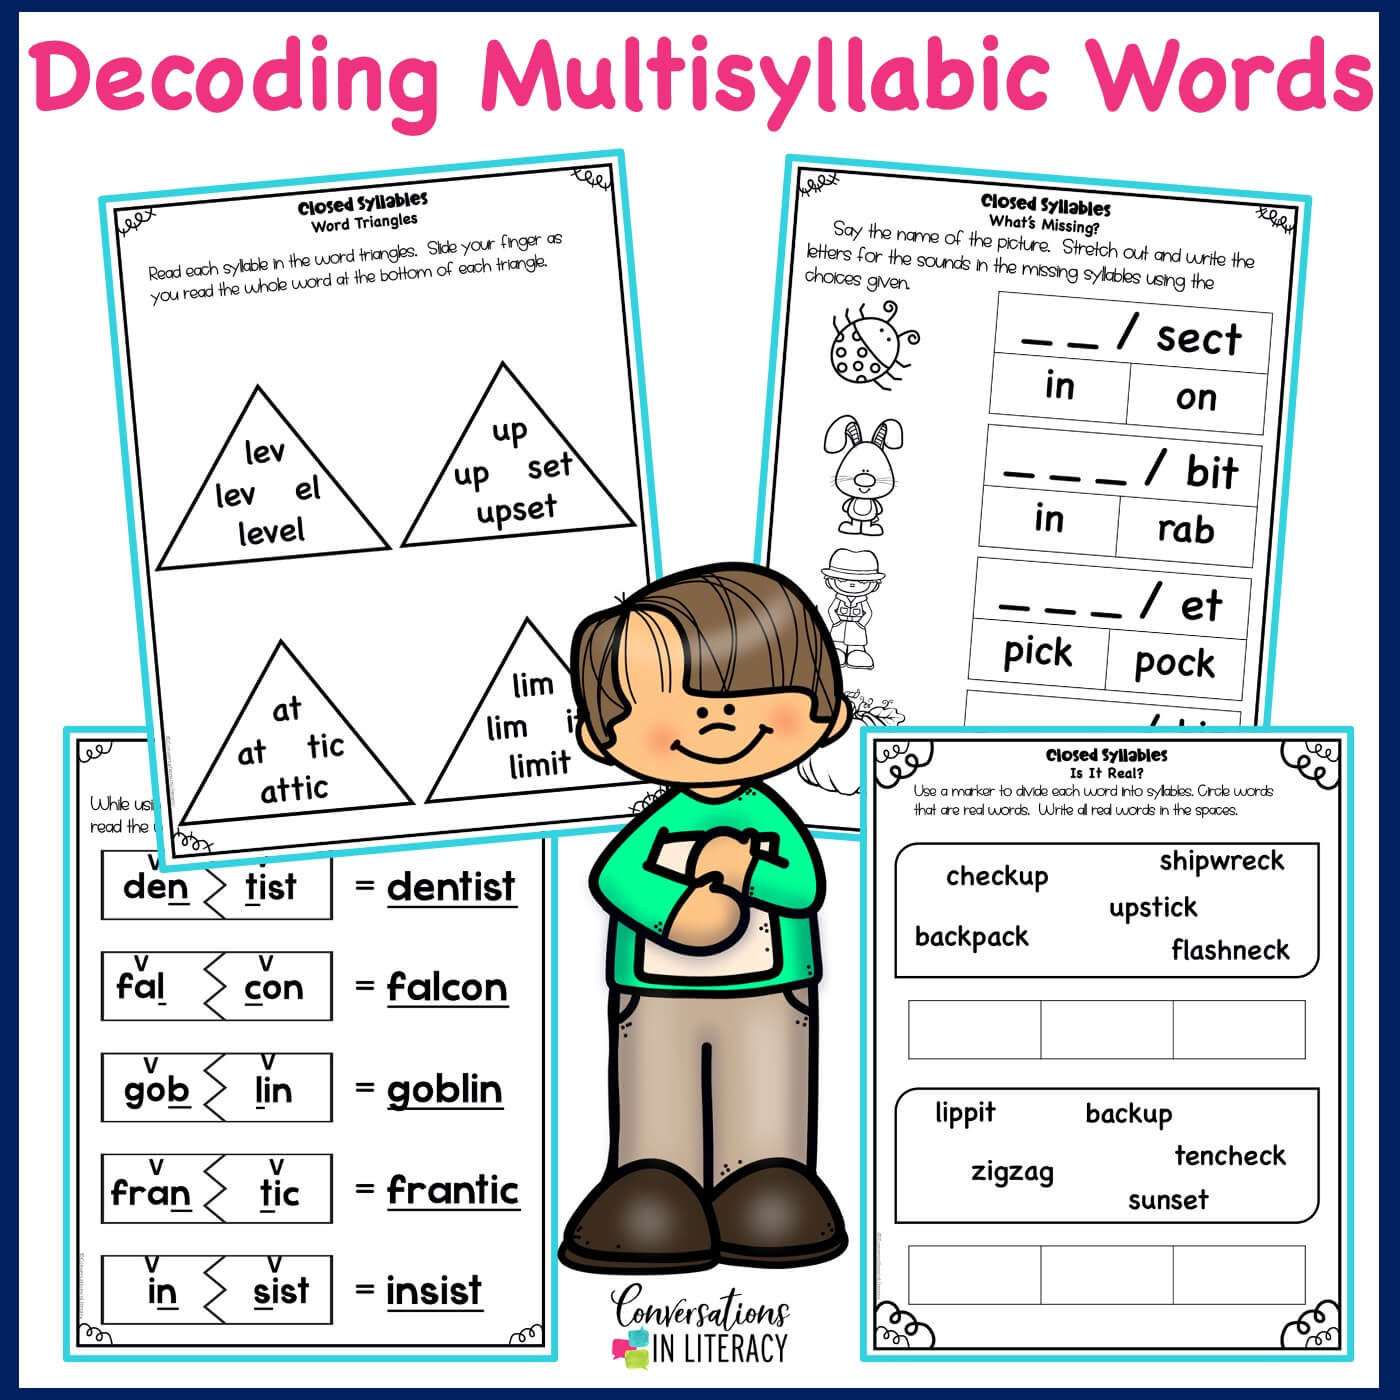 Free Closed Syllables Decoding Multisyllabic Words Activities - Free Printable Decoding Games